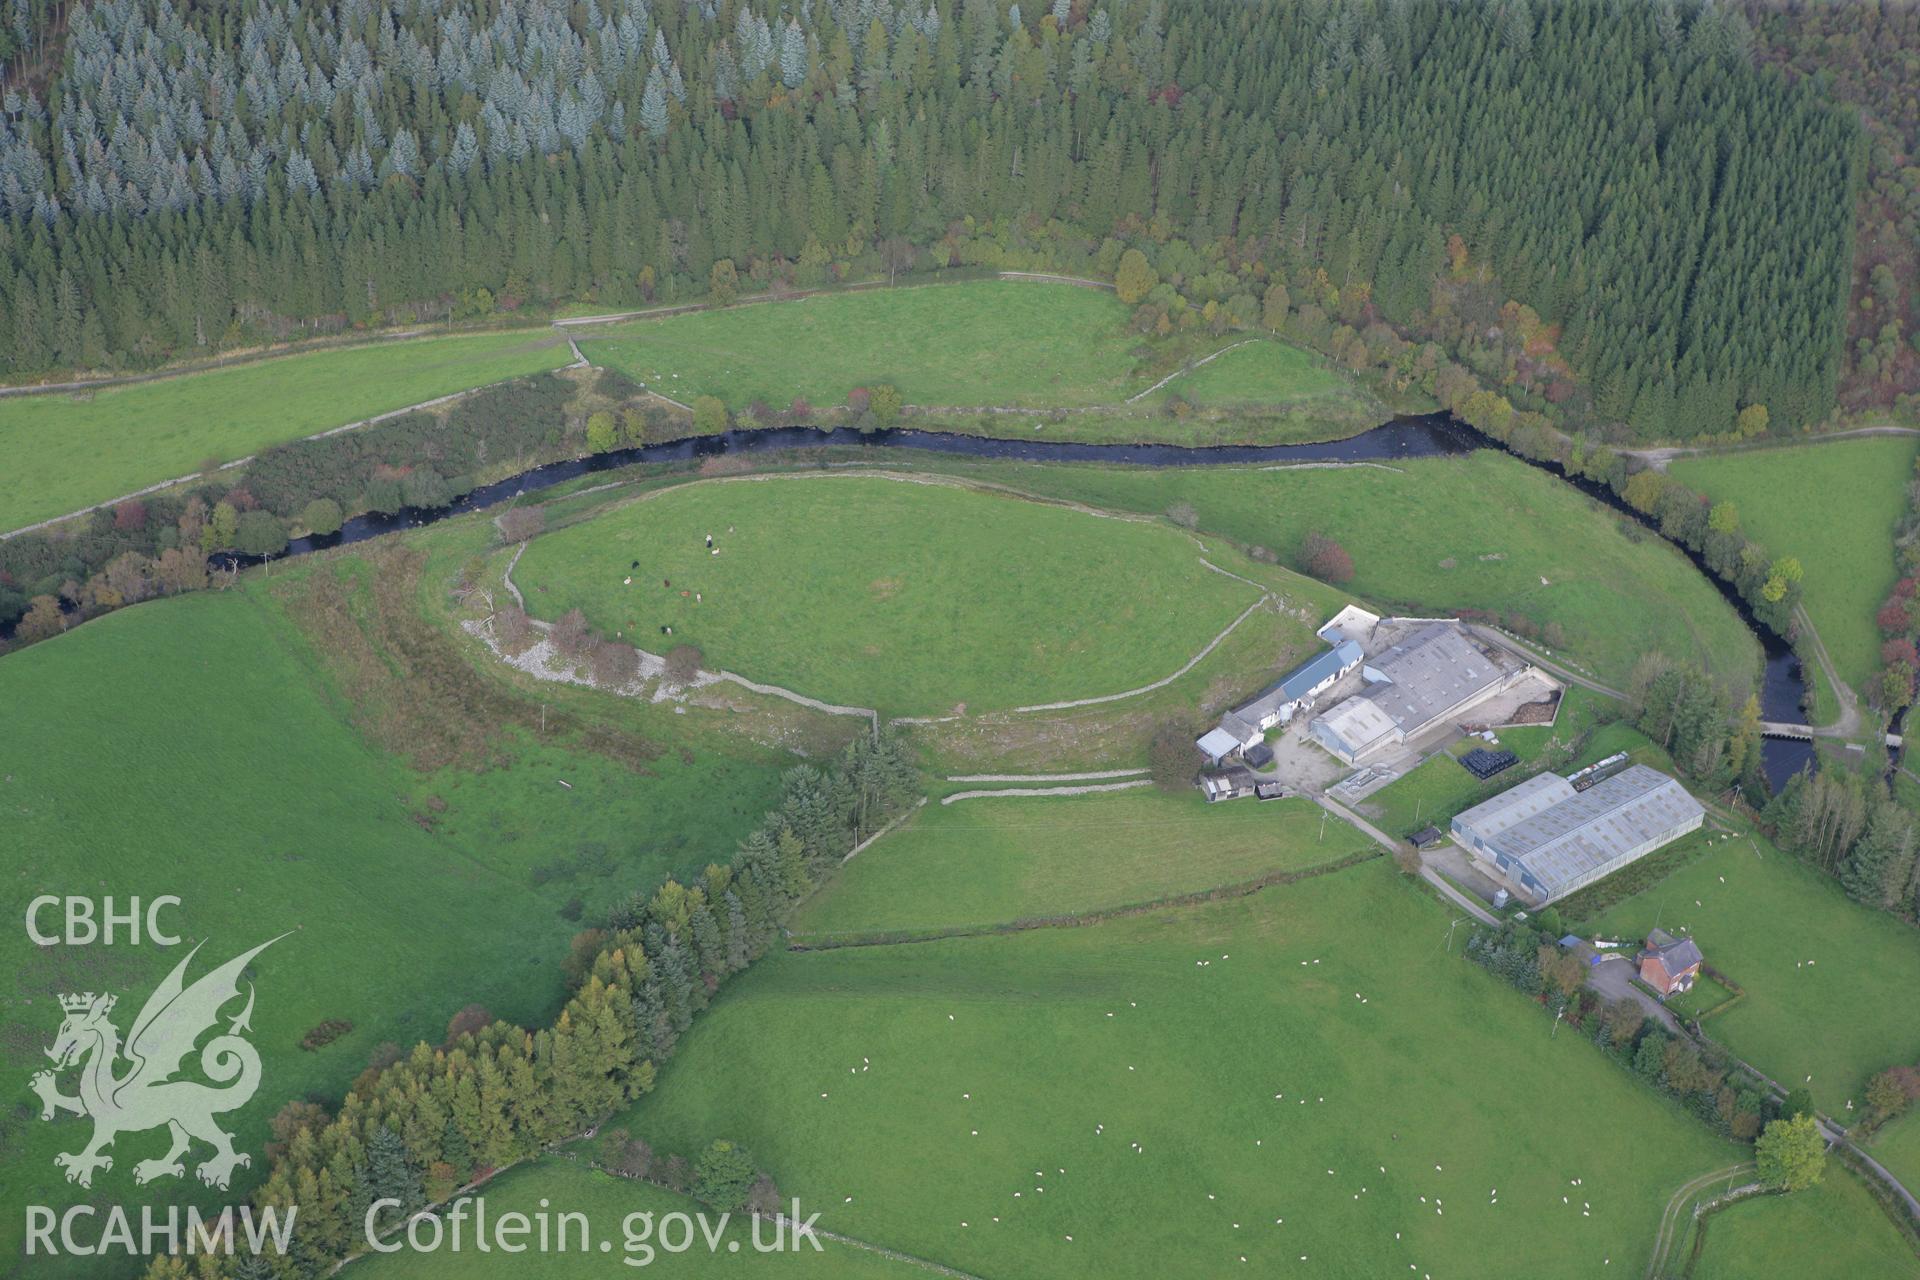 RCAHMW colour oblique aerial photograph of Caer Ddunod. Taken on 13 October 2009 by Toby Driver